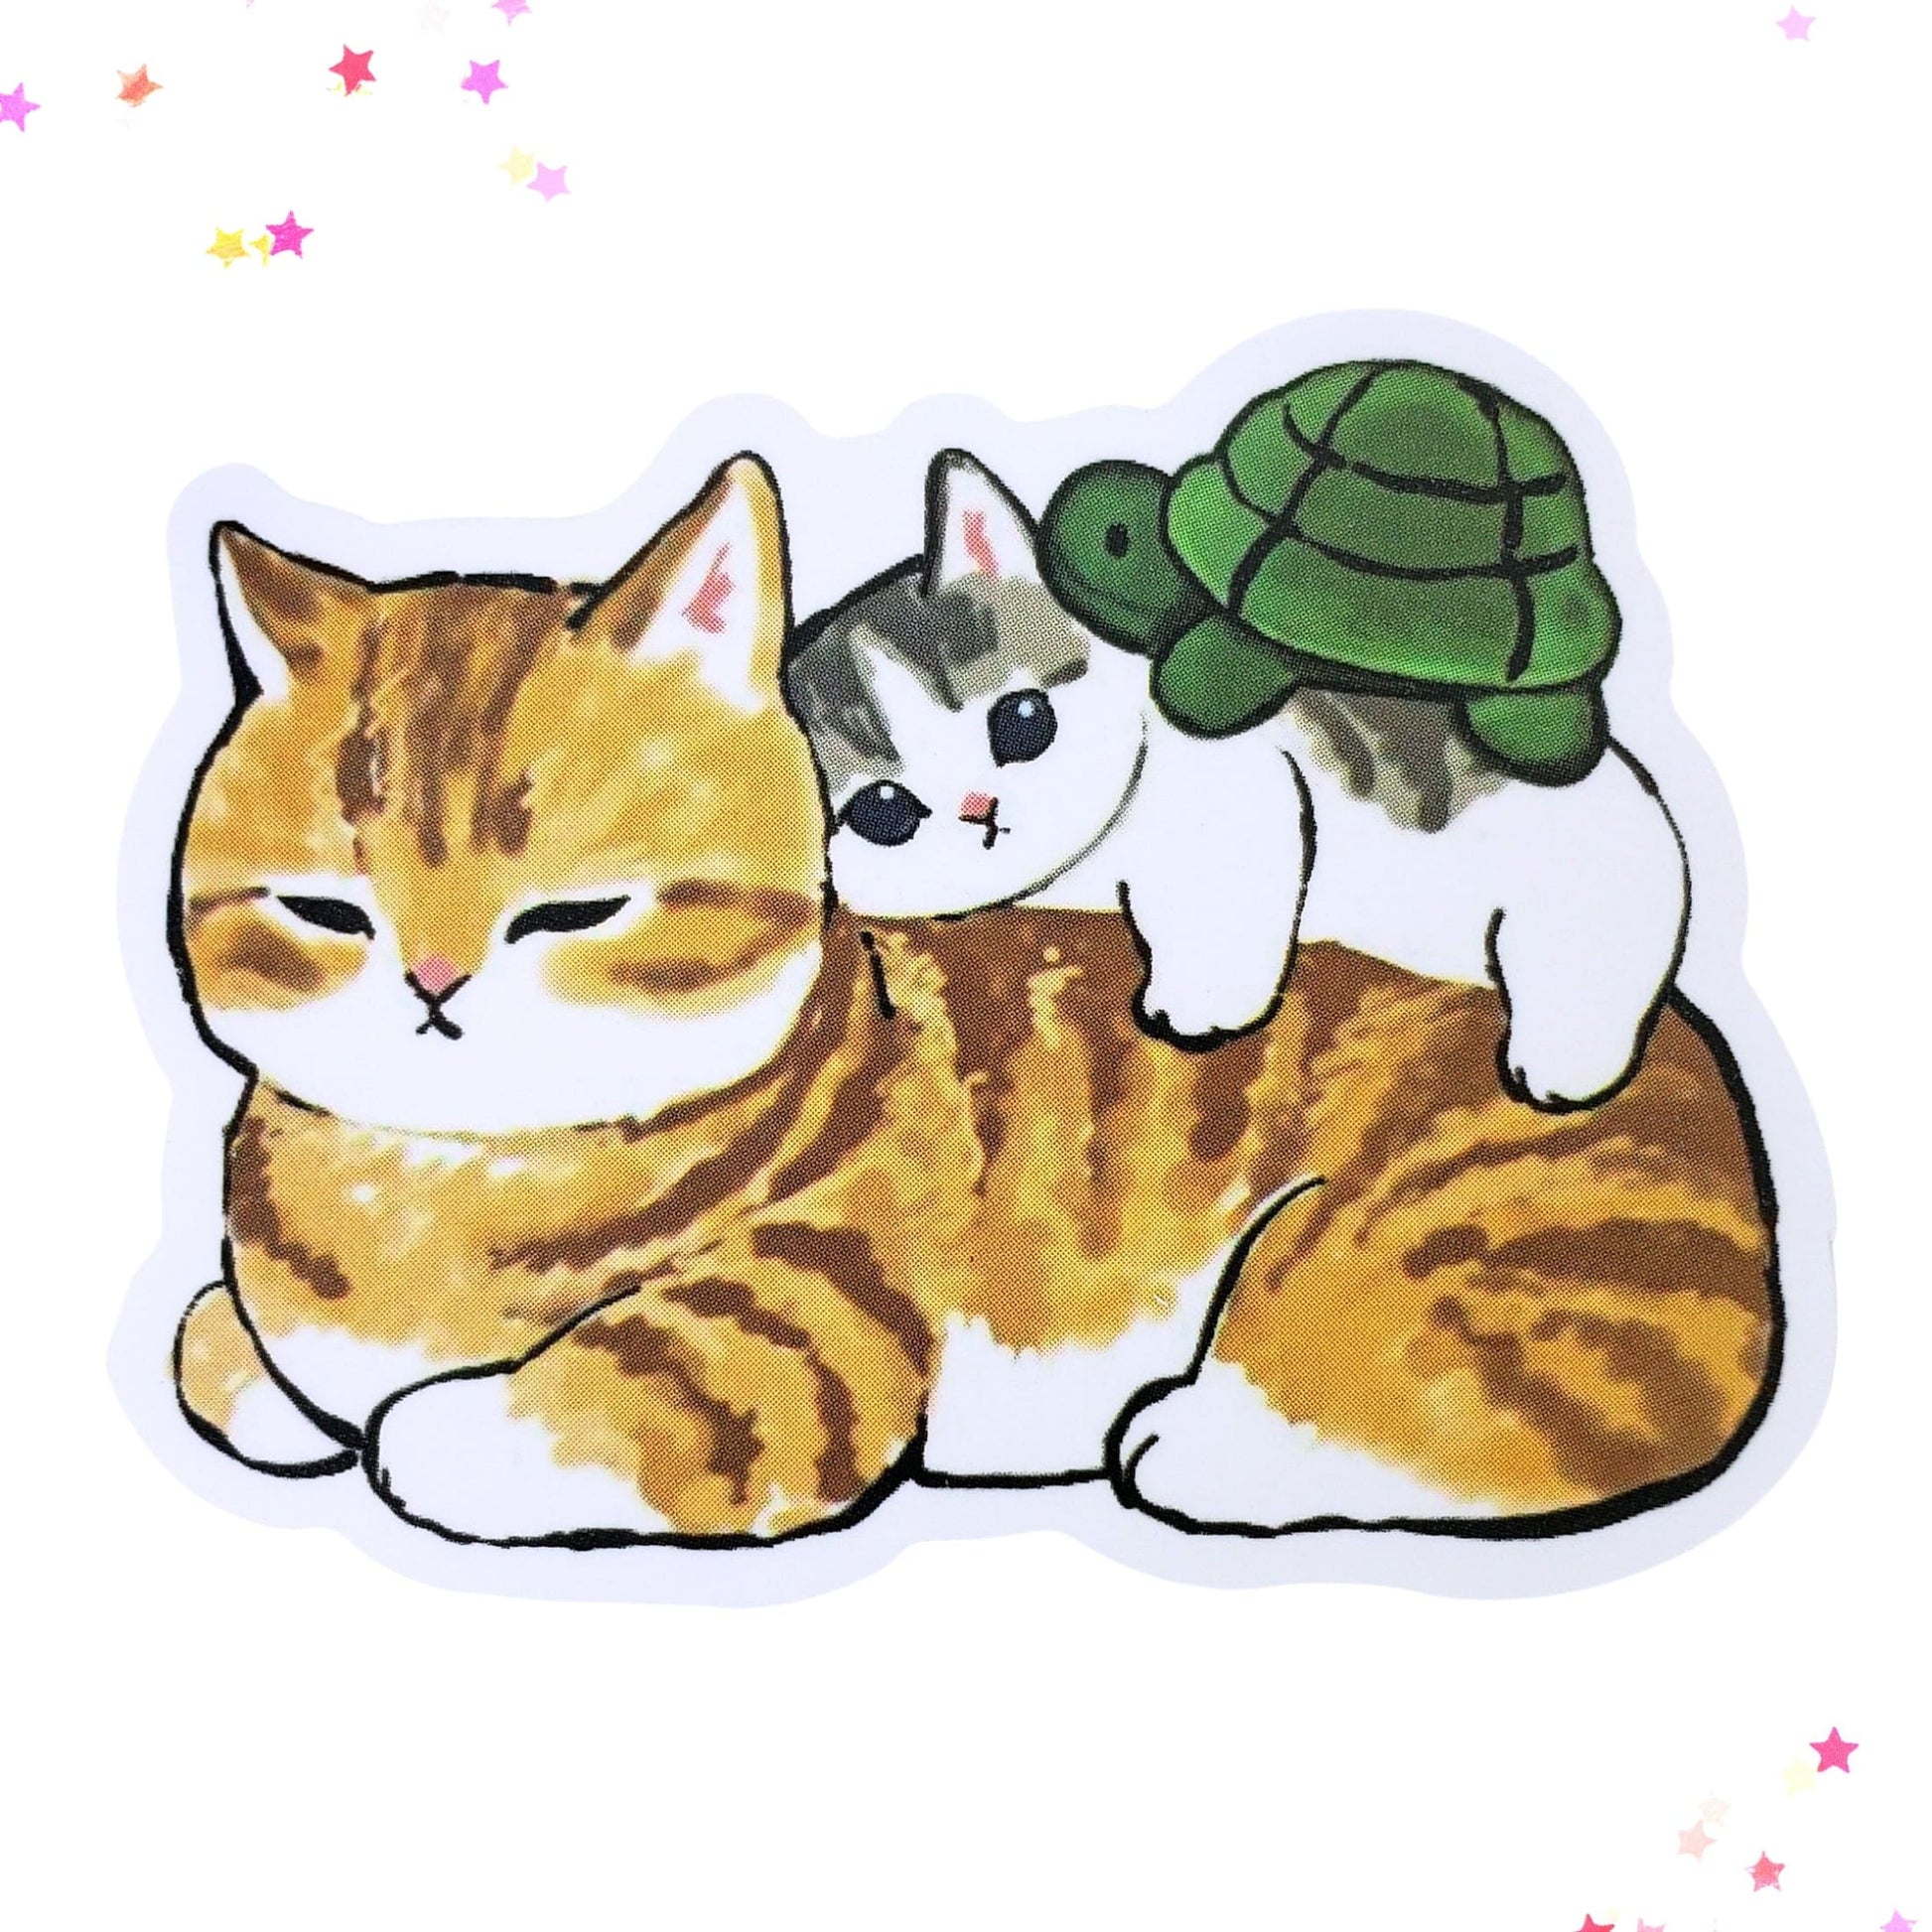 Orange Tabby, Gray Tabby Kitten, and Turtle Waterproof Sticker | Cat Stack from Confetti Kitty, Only 1.00